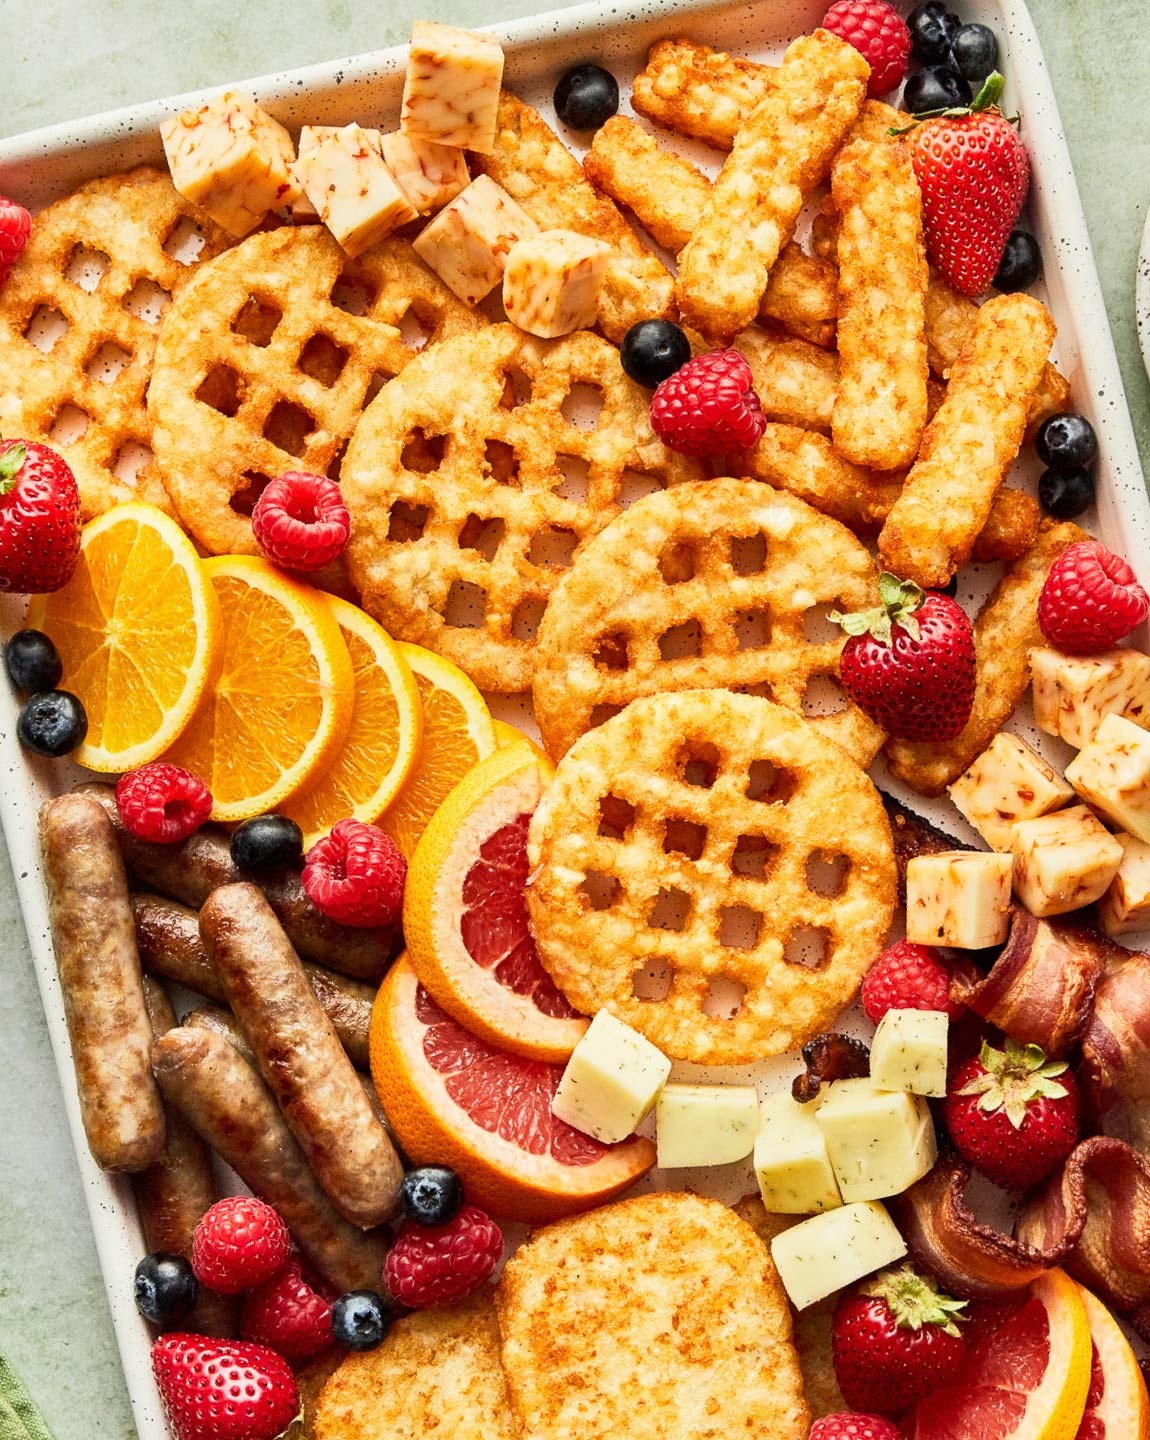 Brunch Board Ideas & Photos To Give You All Sorts Of Breakfast Inspo –  StyleCaster